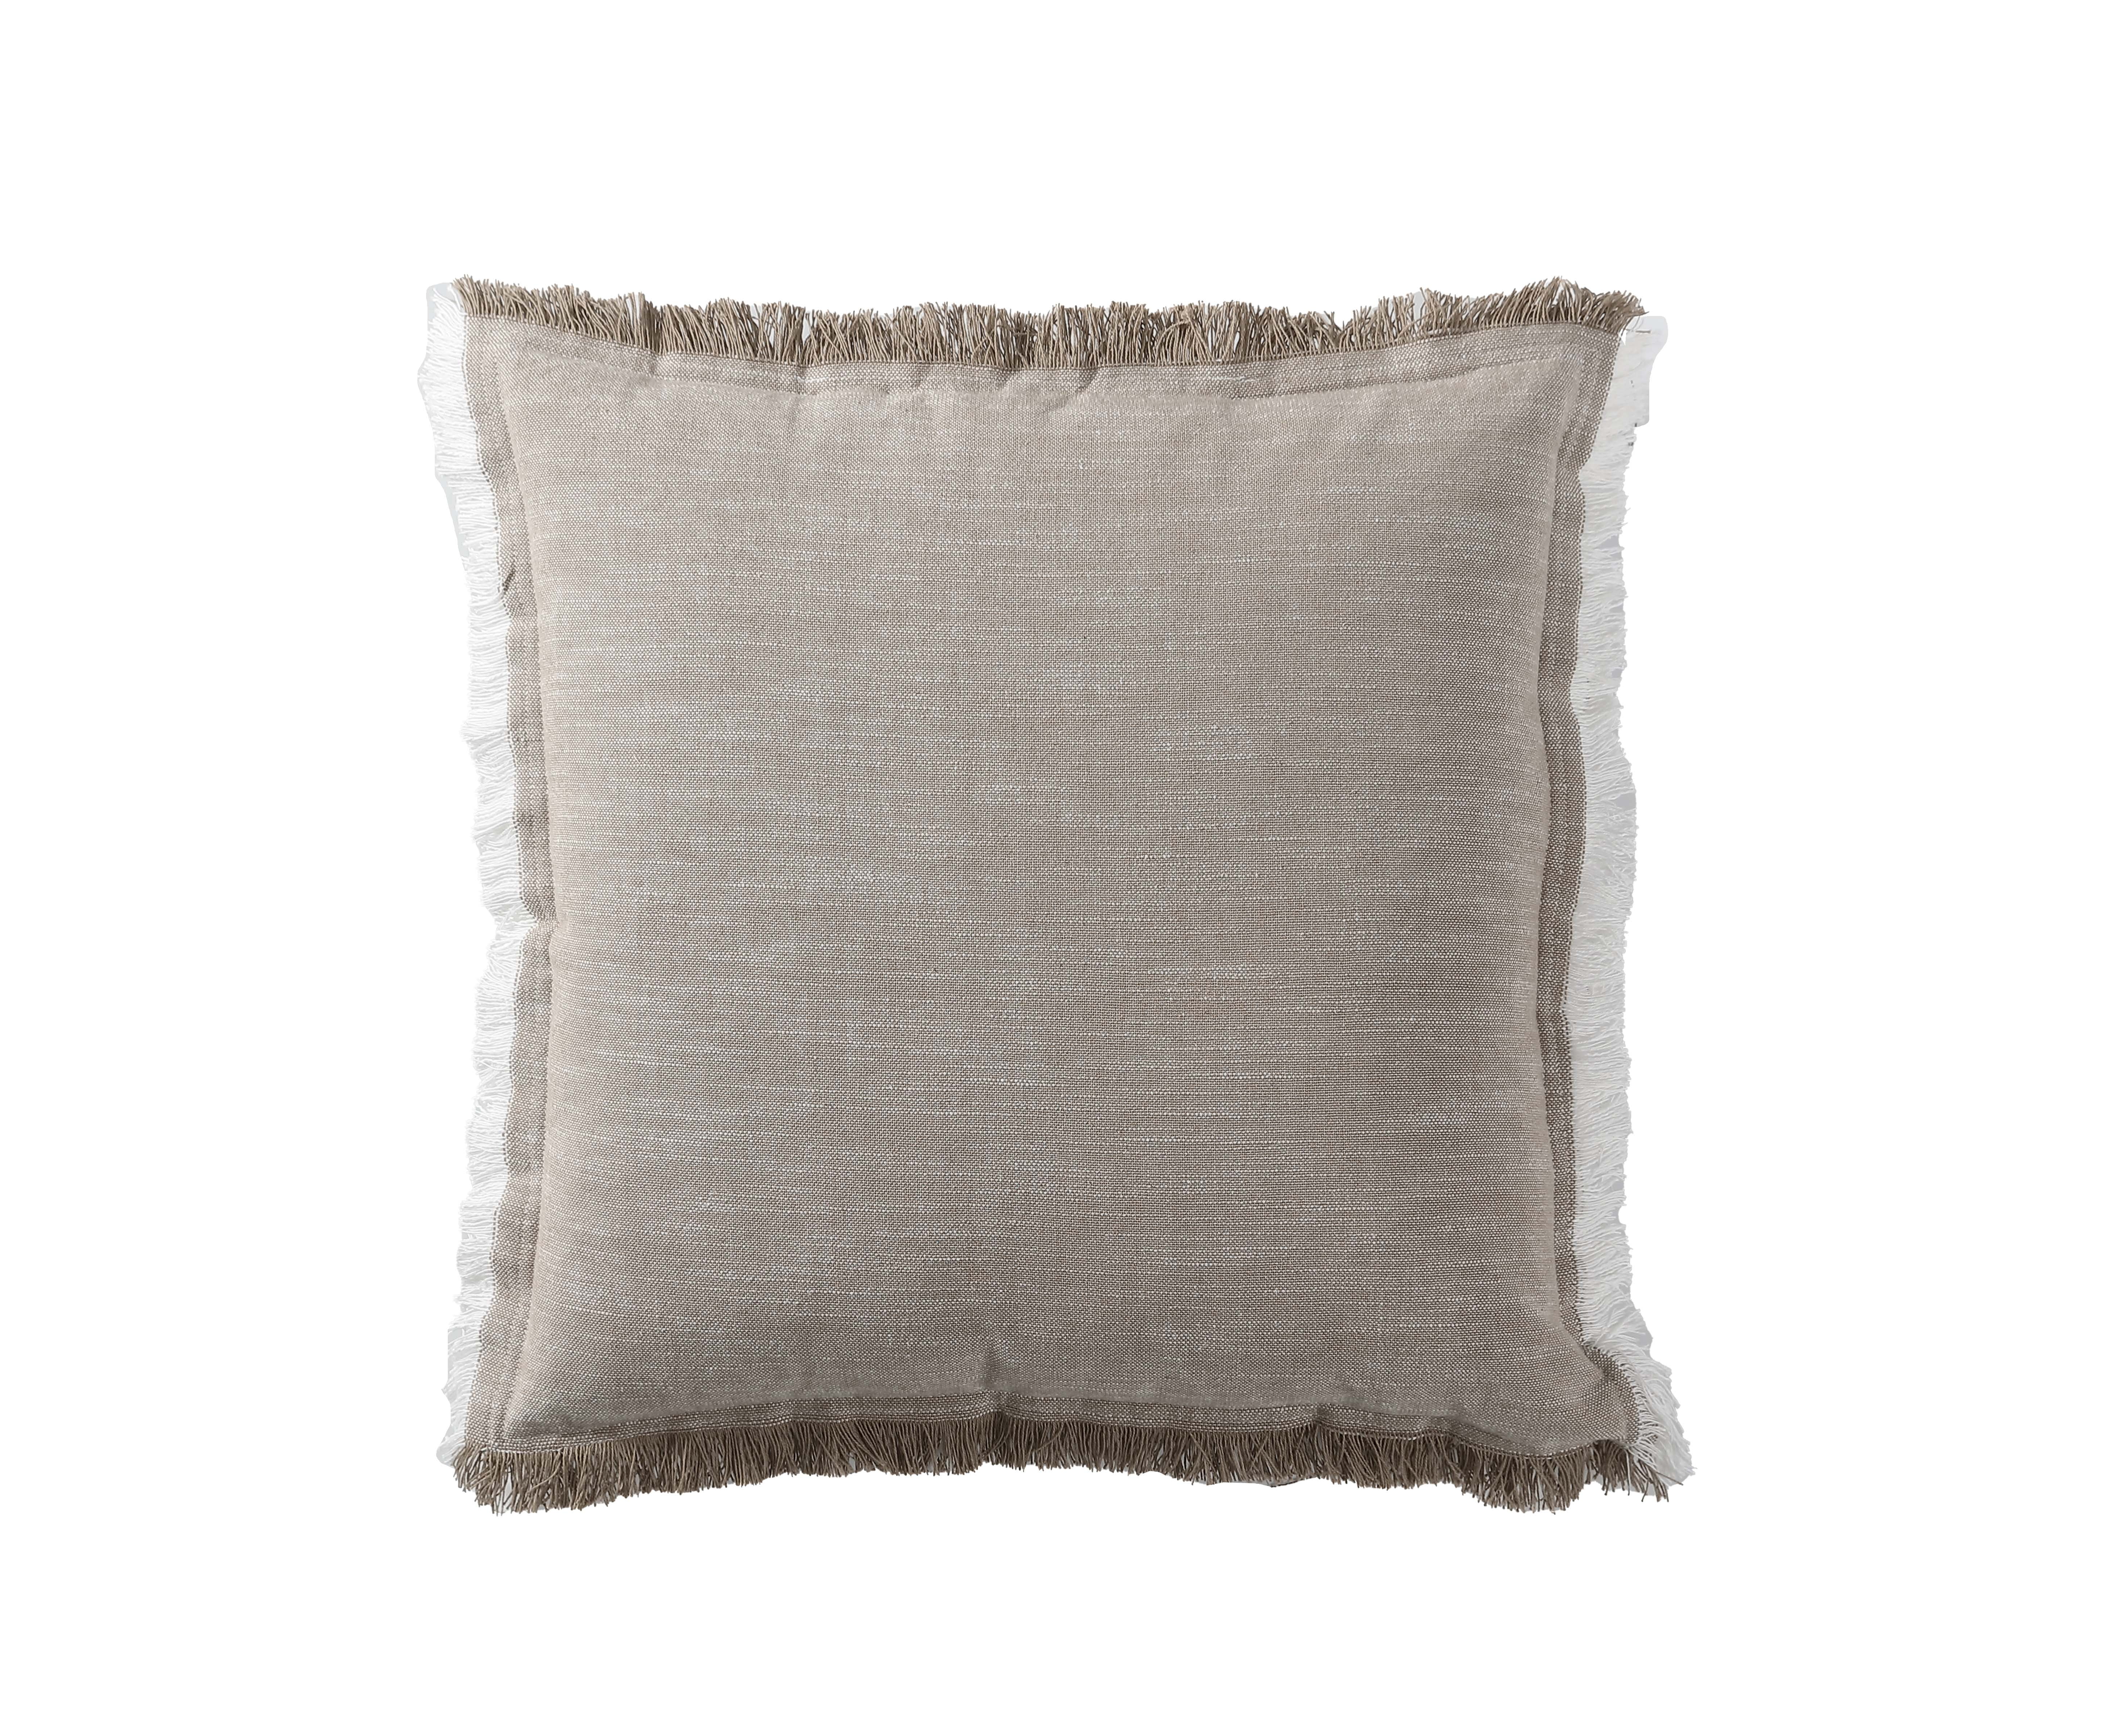 Pillows & Throws – The Happy Home